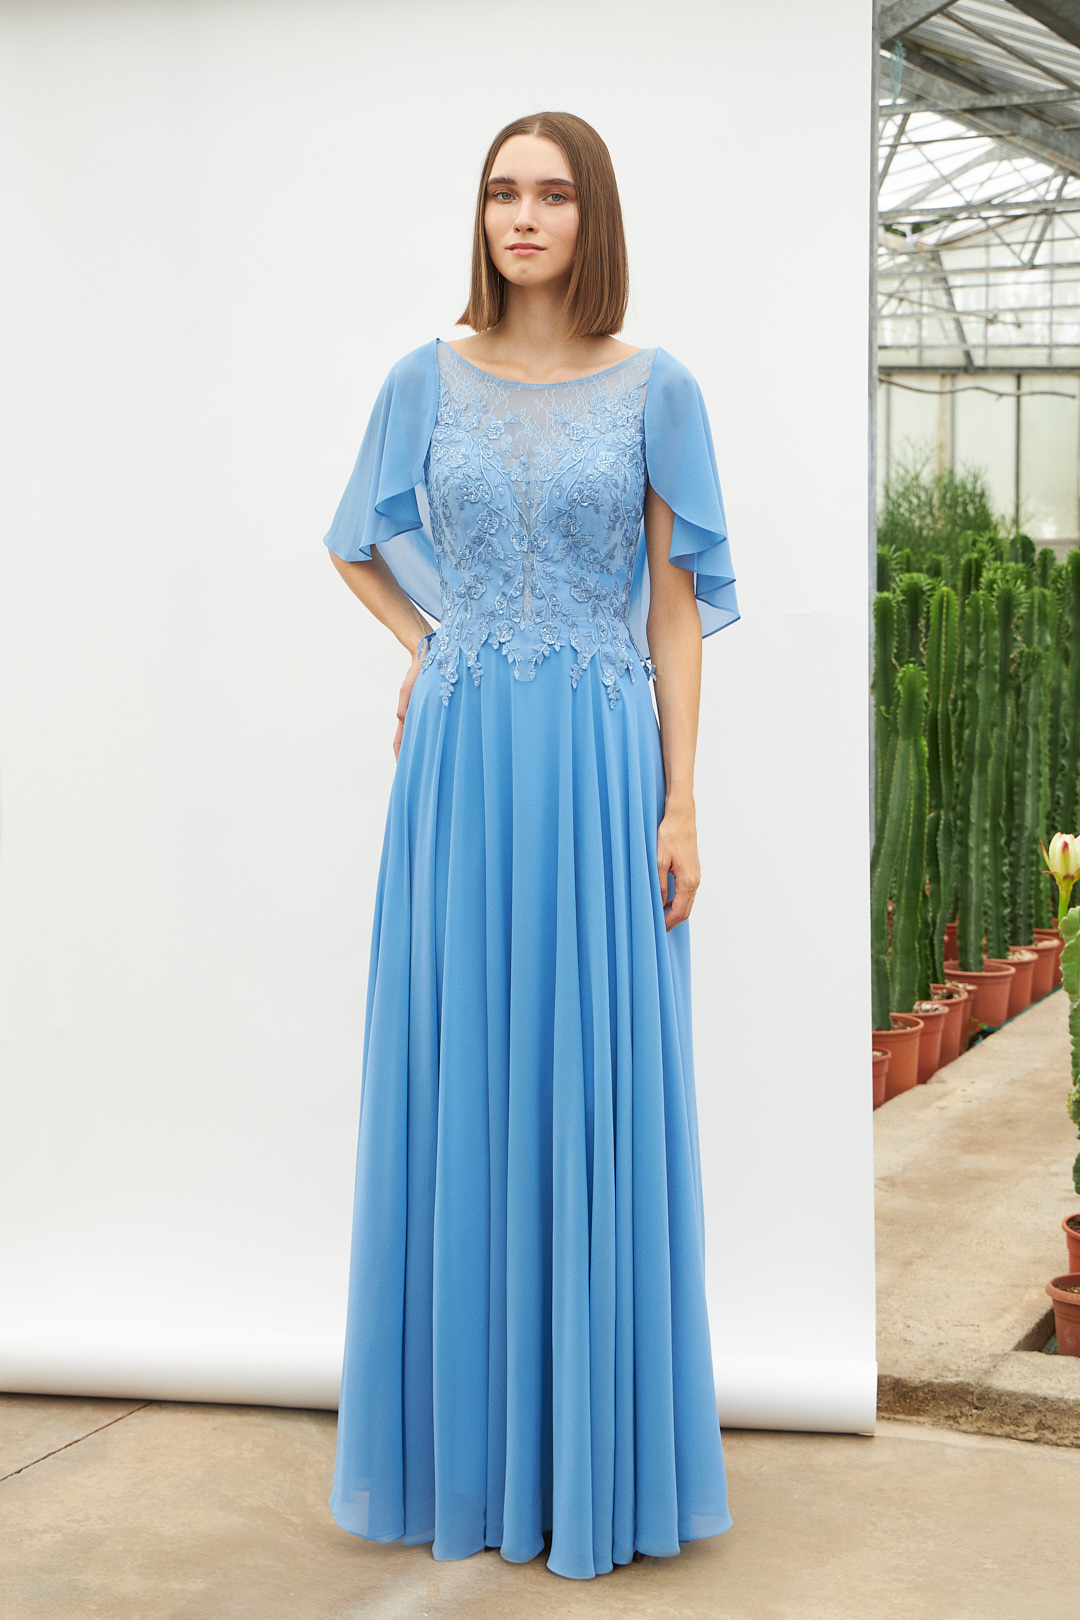 Классические платья / Long classic chiffon dress with lace and beaded top for the mother of the bride